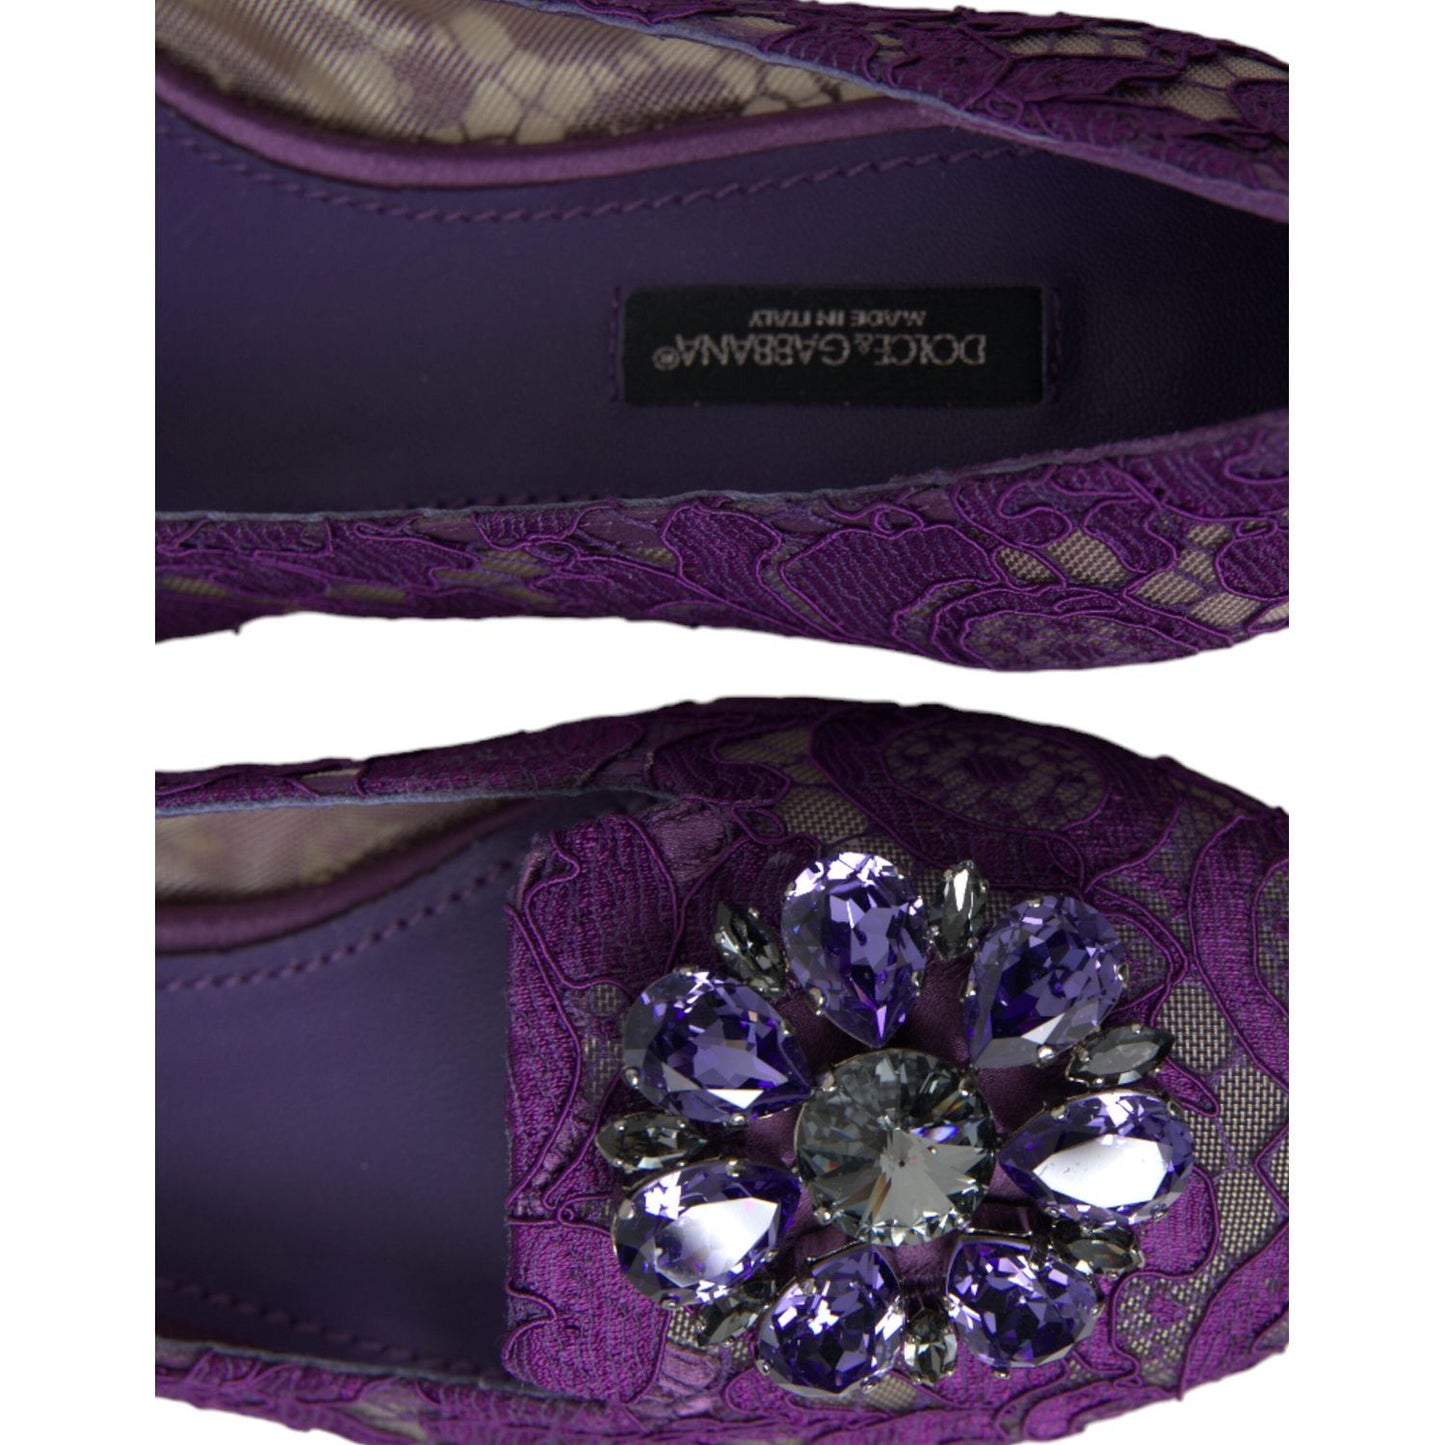 Dolce & Gabbana Elegant Floral Lace Vally Flat Shoes purple-vally-taormina-lace-crystals-flats-shoes